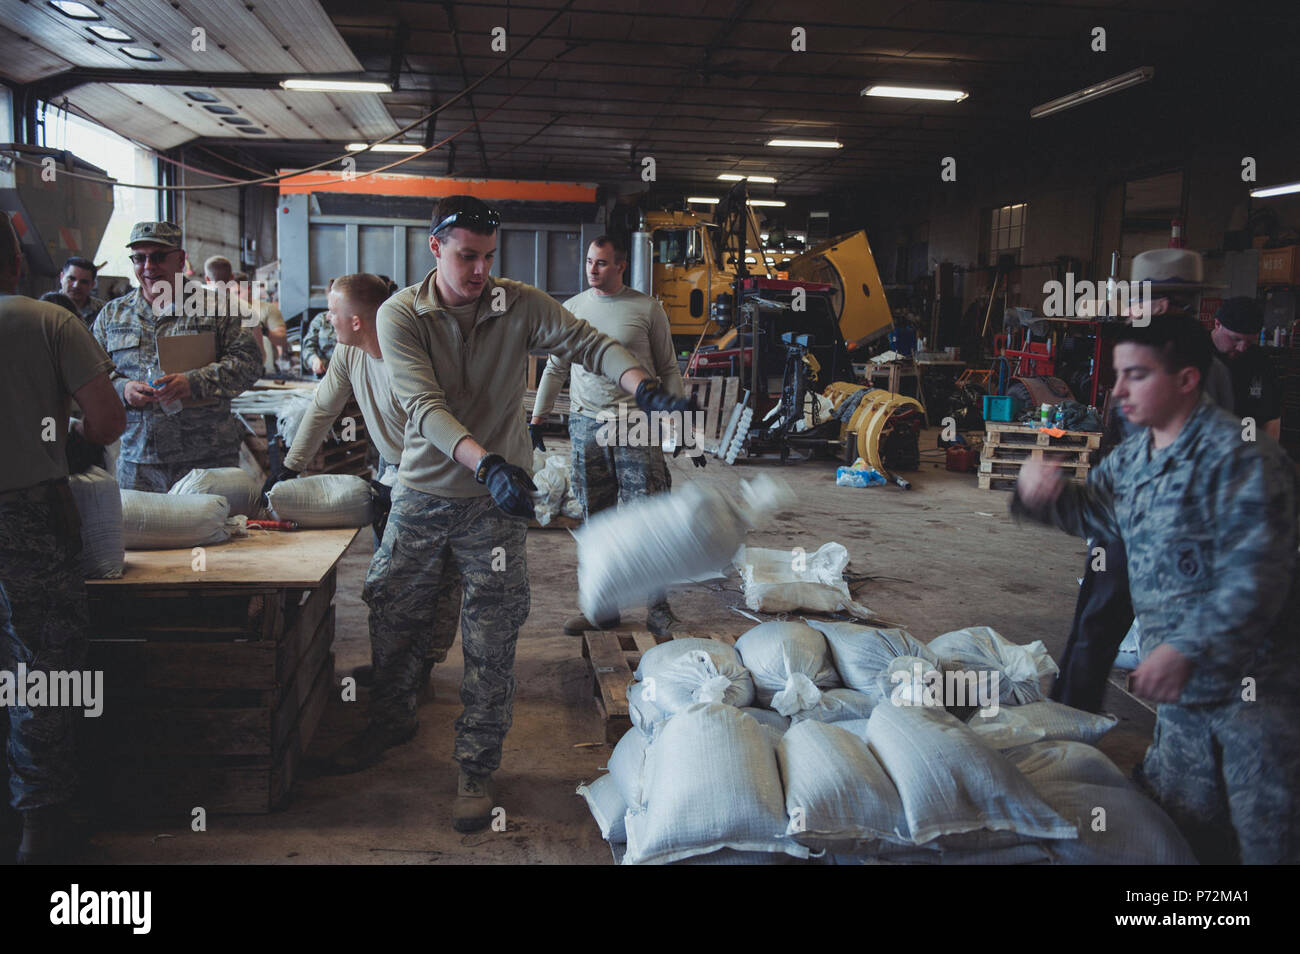 Airmen assigned to the 107th Attack Wing of the New York Air National Guard fill sandbags at the Kendall, N. Y. town garage on May 11, 2017 as part of the New York National Guard response to high water levels in Lake Ontario which resulted in local flooding. Between May 3 and May 13 323 New York National Guard Soldiers and Airmen filled 239, 239,703 sandbags at six locations in counties along the lake. Stock Photo